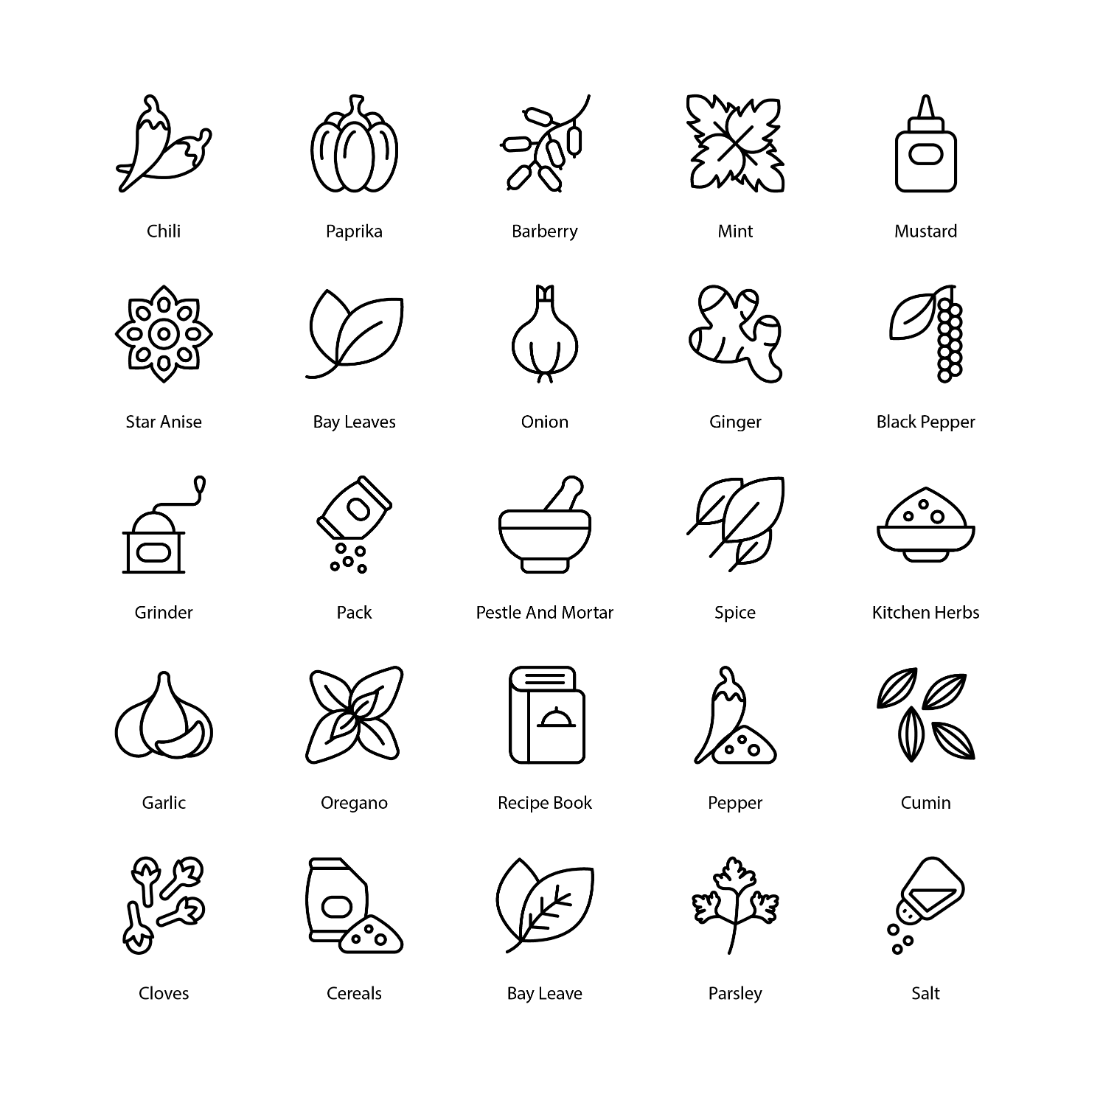 Herbs and Spices Icon Set cover image.